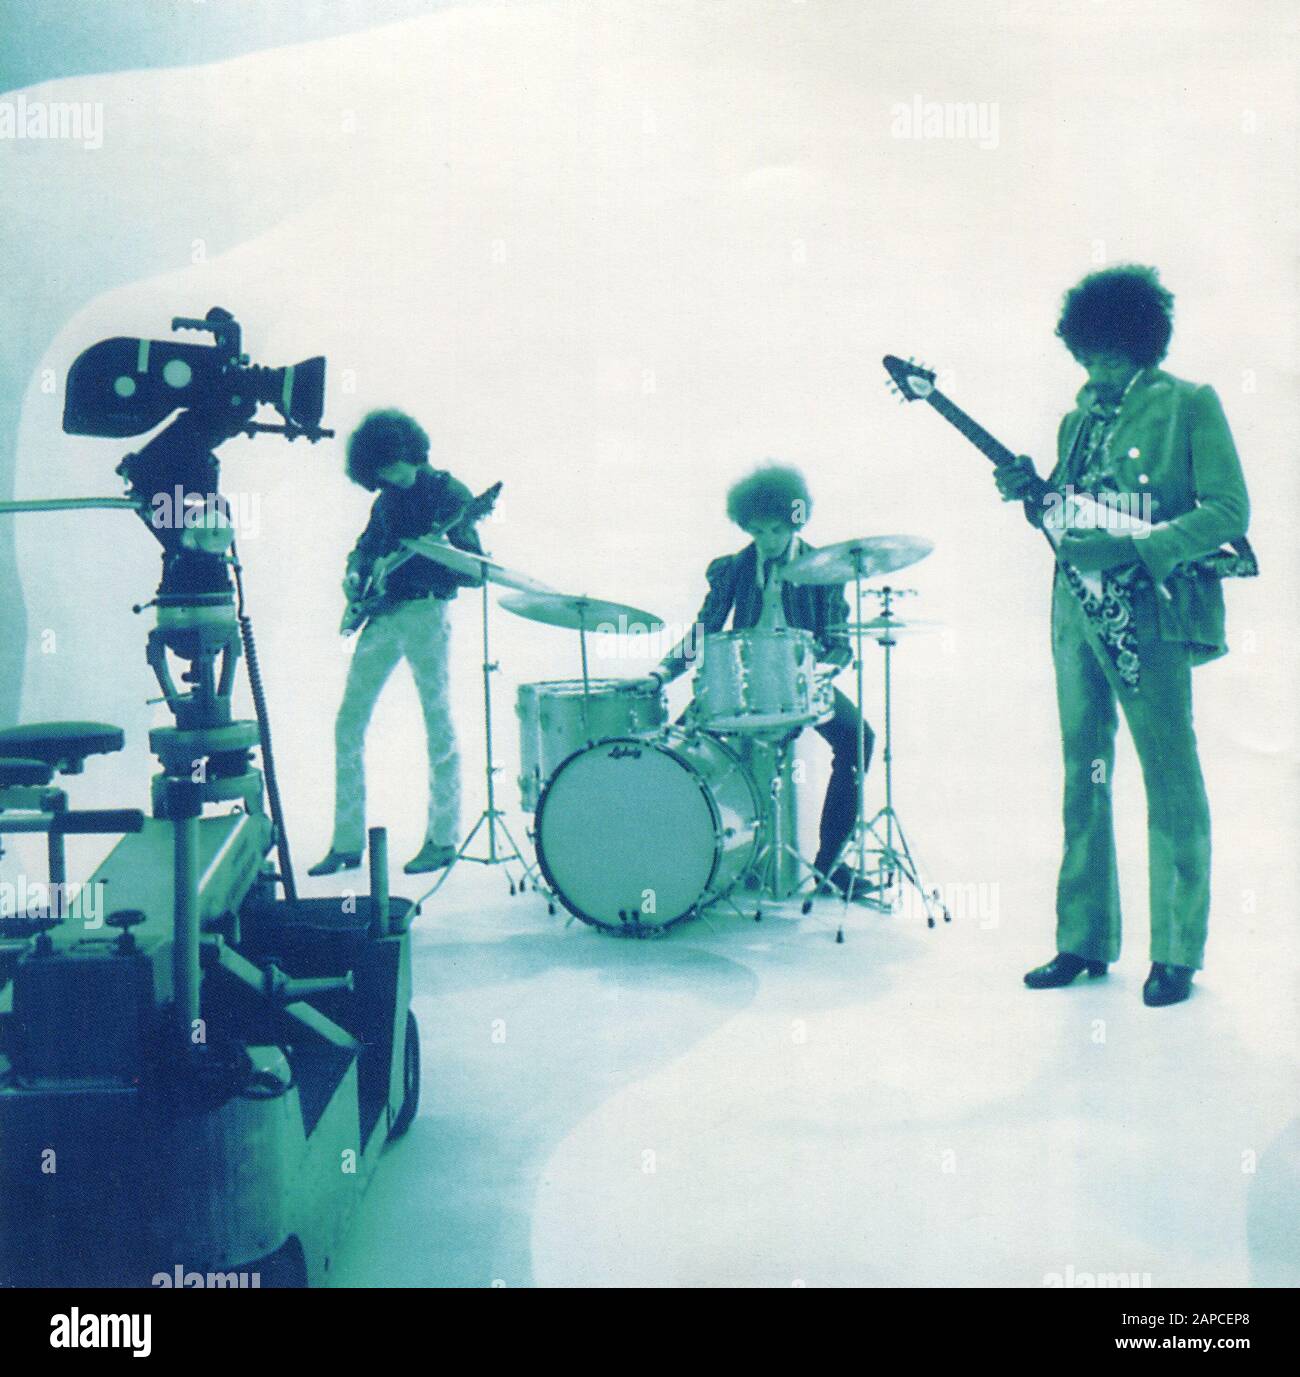 CD: THE JIMI HENDRIX EXPERIENCE UNRELEASED & RARE MASTERS PLUS (4CD BOX), released on MCA Records on 2000. Stock Photo